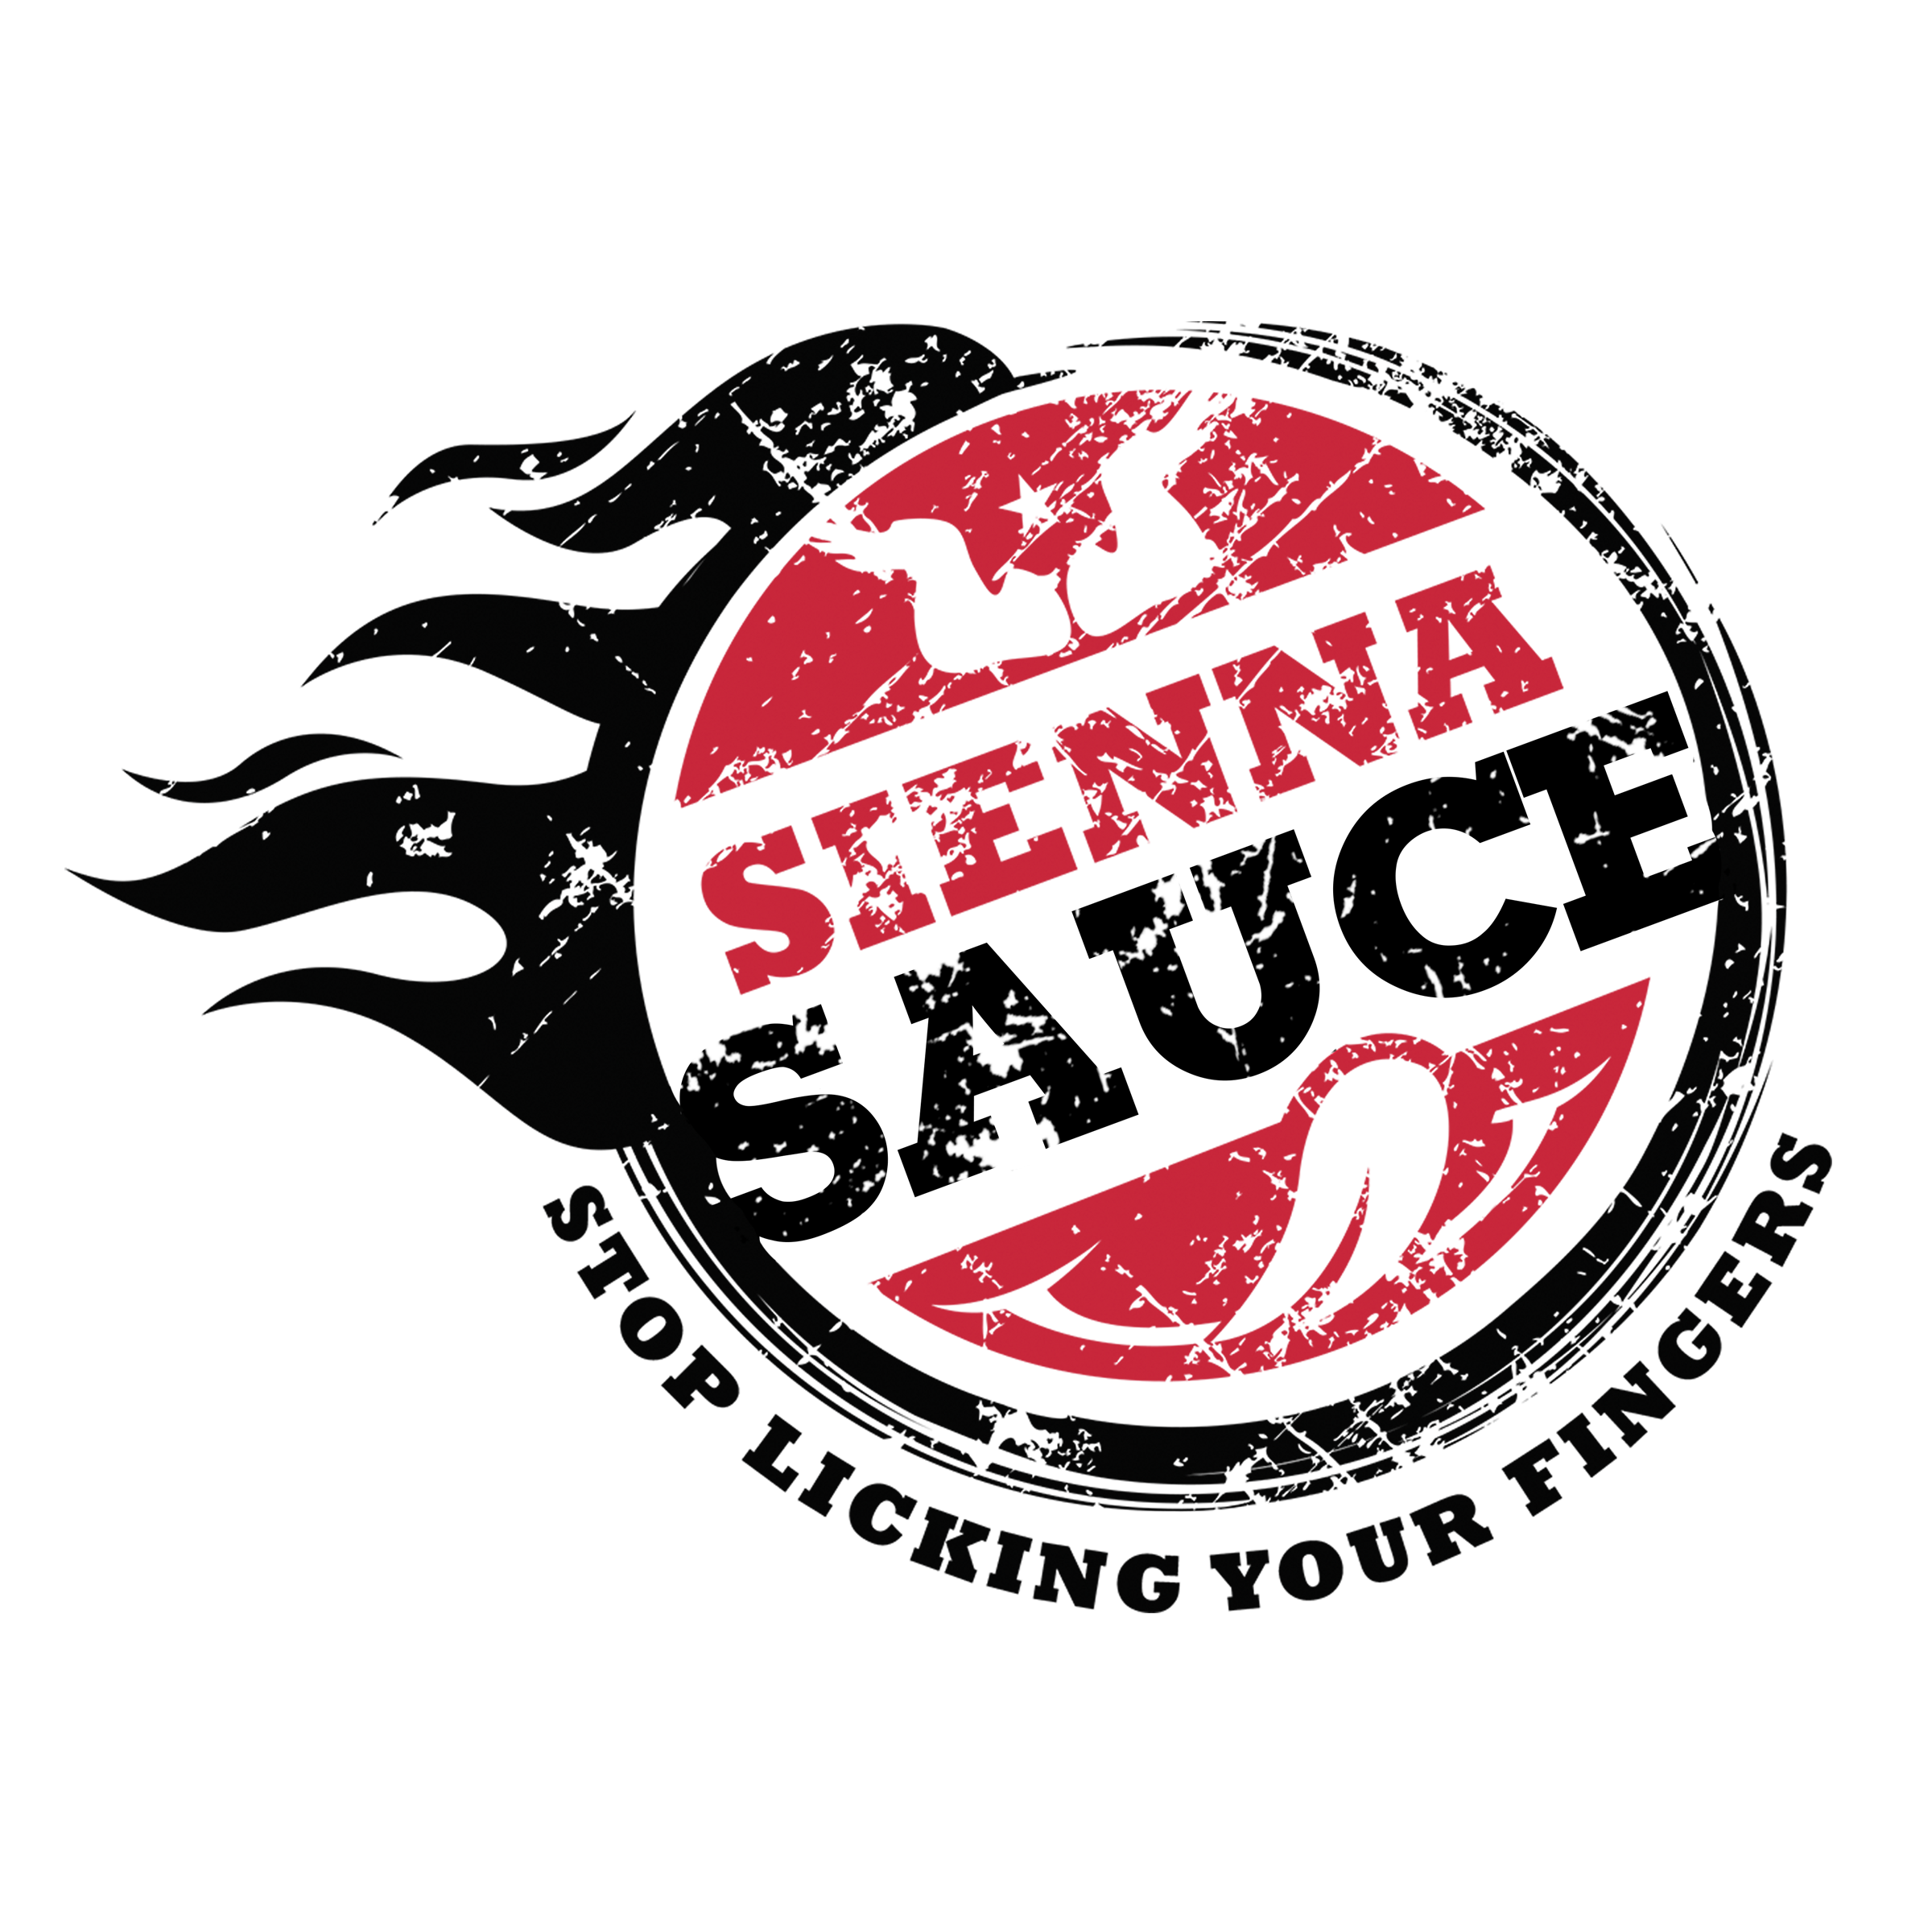 The logo or business face of "Sienna Sauce "